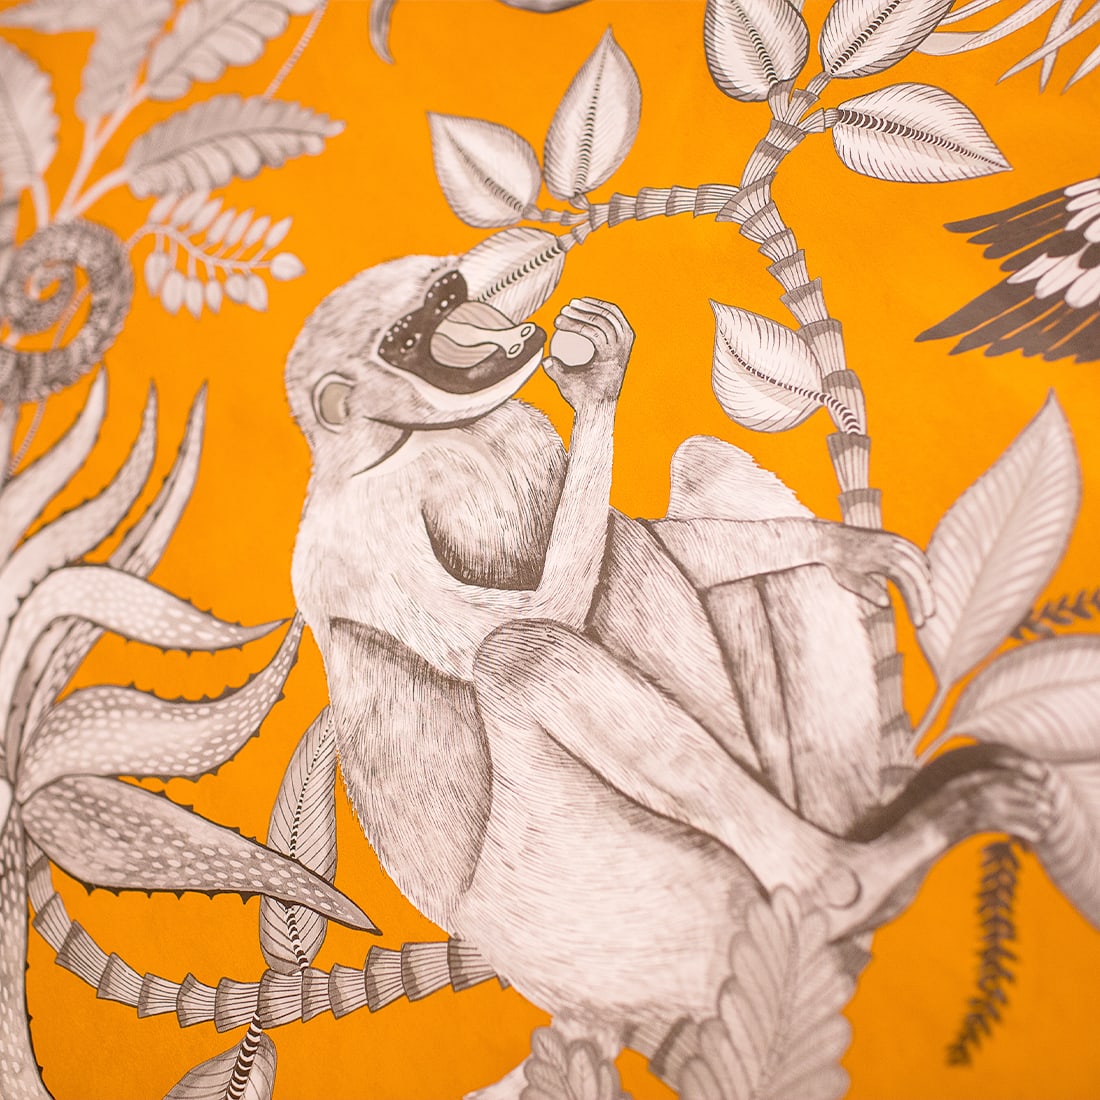 Orange wall paper with monkey detail in renovated bath